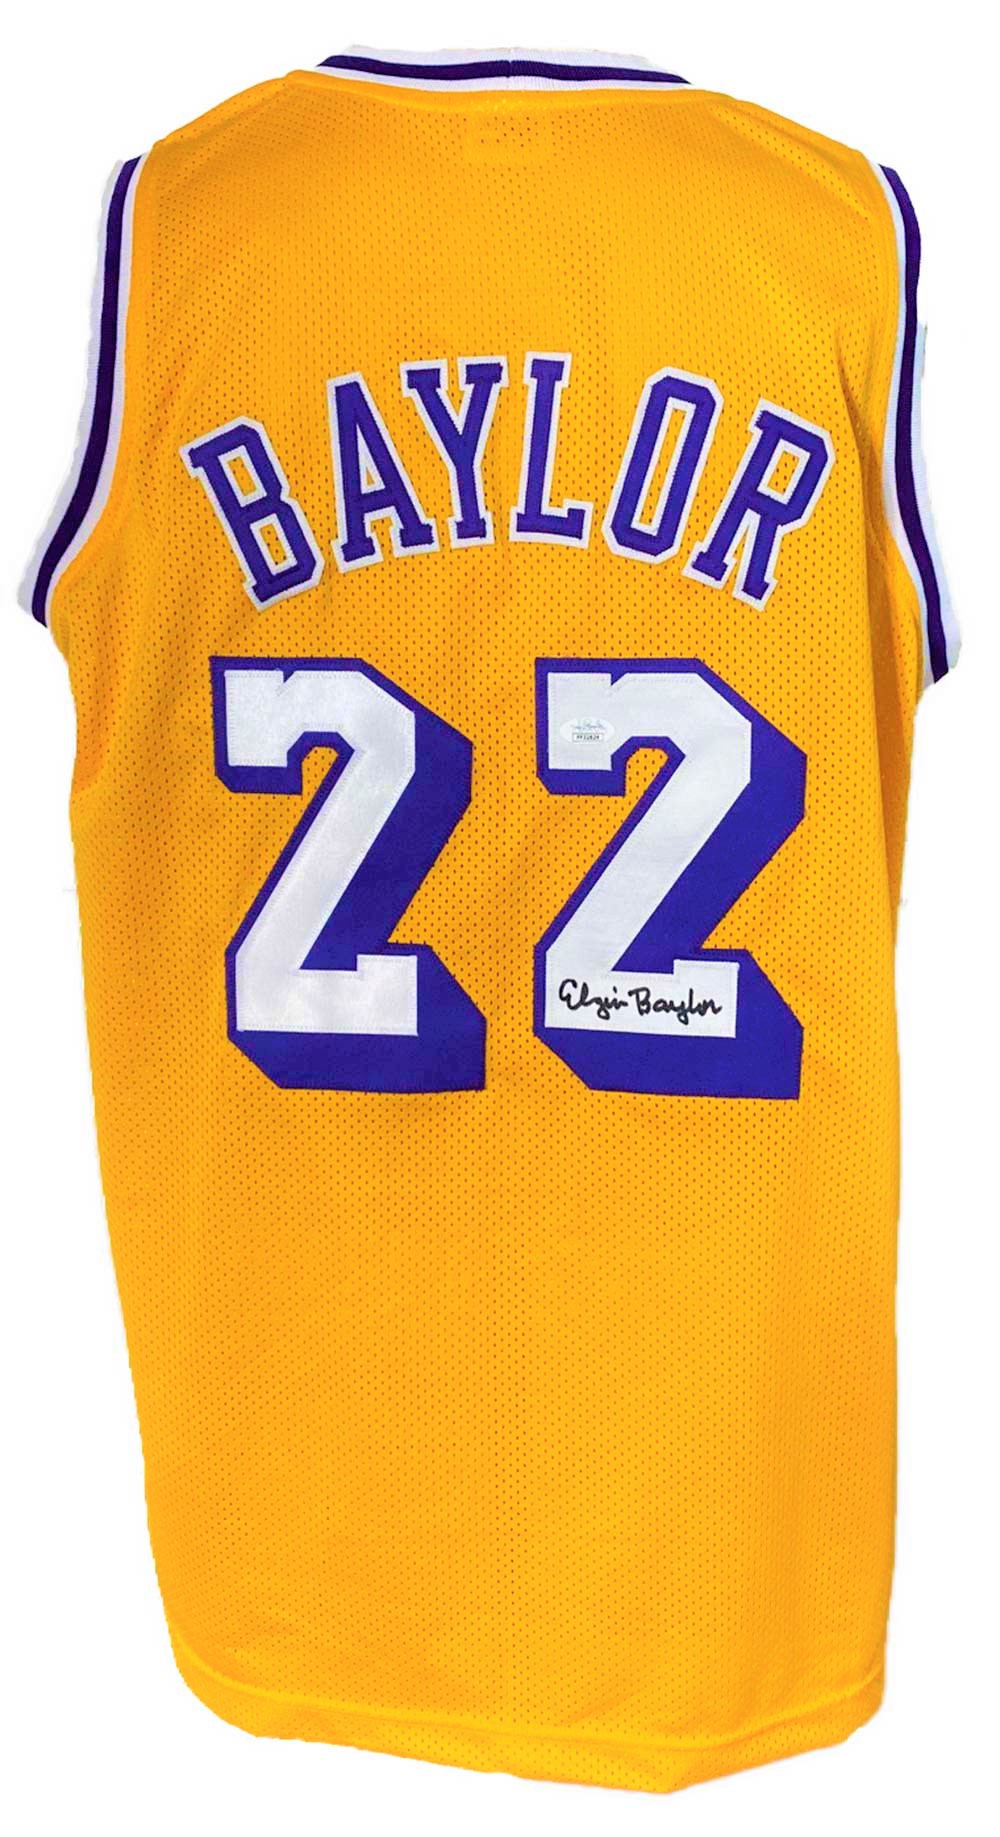 Elgin Baylor Lakers Jersey, Elgin Baylor Los Angeles Lakers Jersey, Sports  Fan Gear & Collectibles